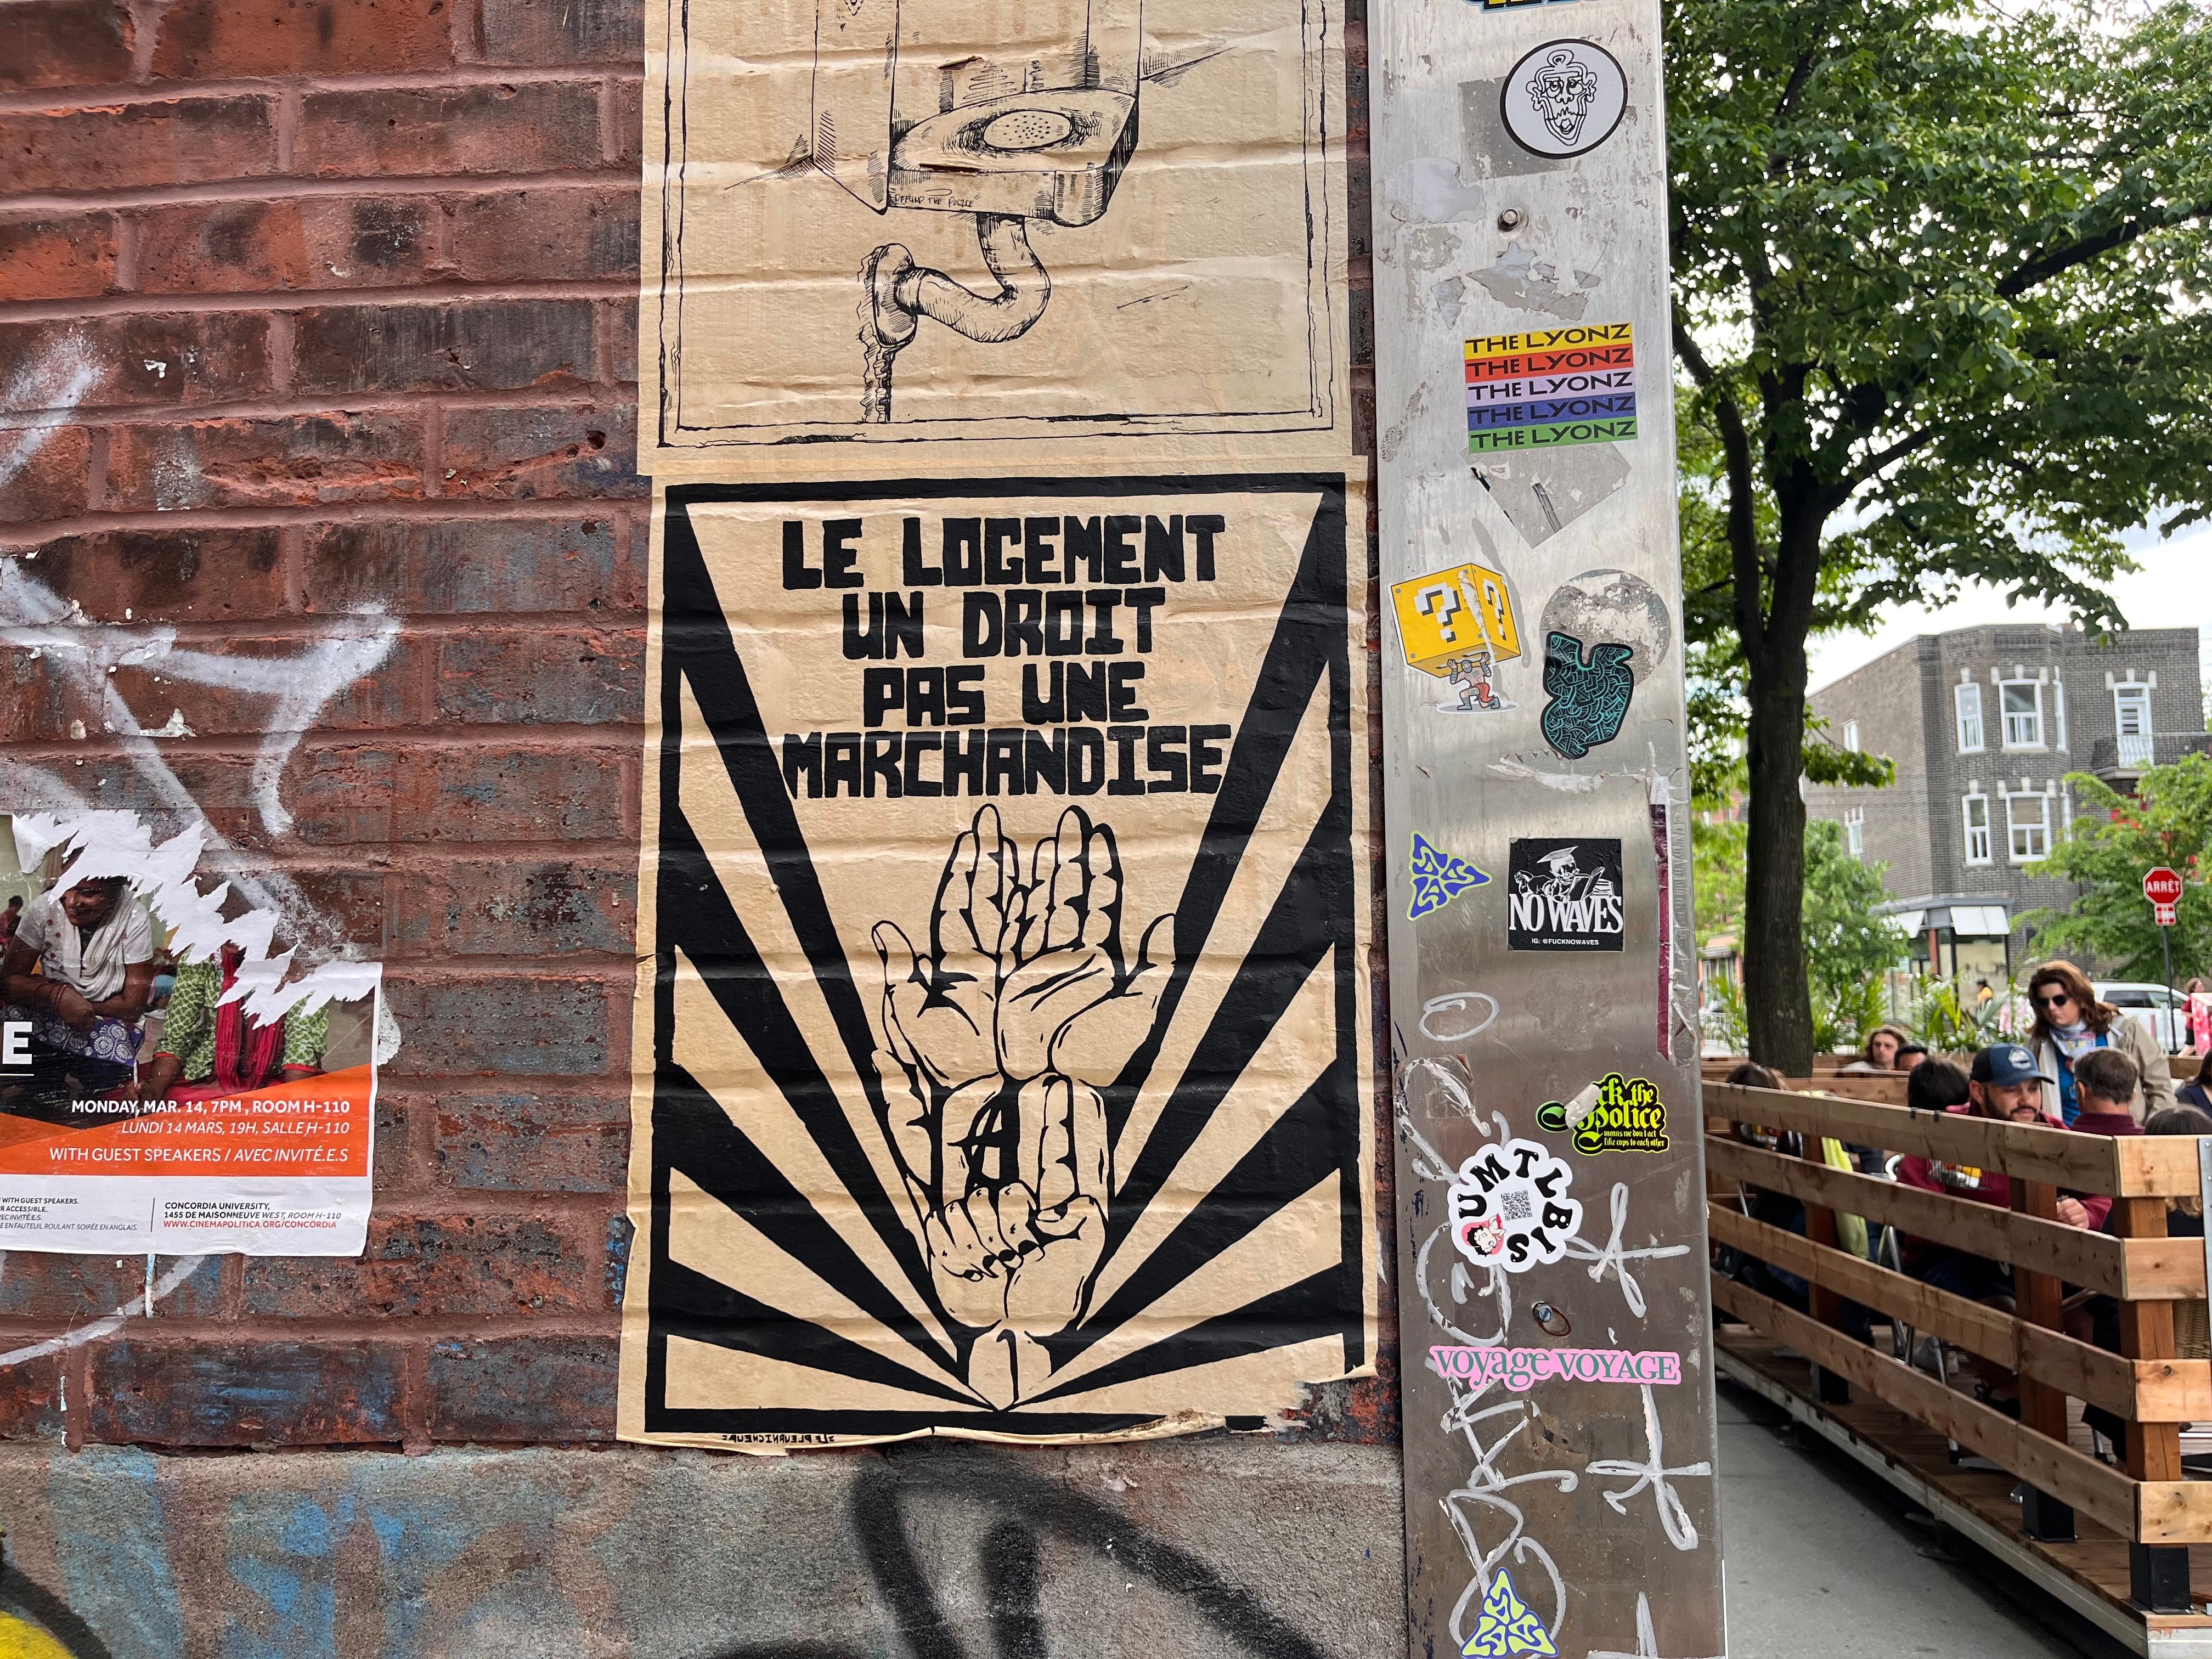 A poster on the streets of Montreal saying "Housing is a right not a commodity", 2022. Credit: Clémence Marcastel